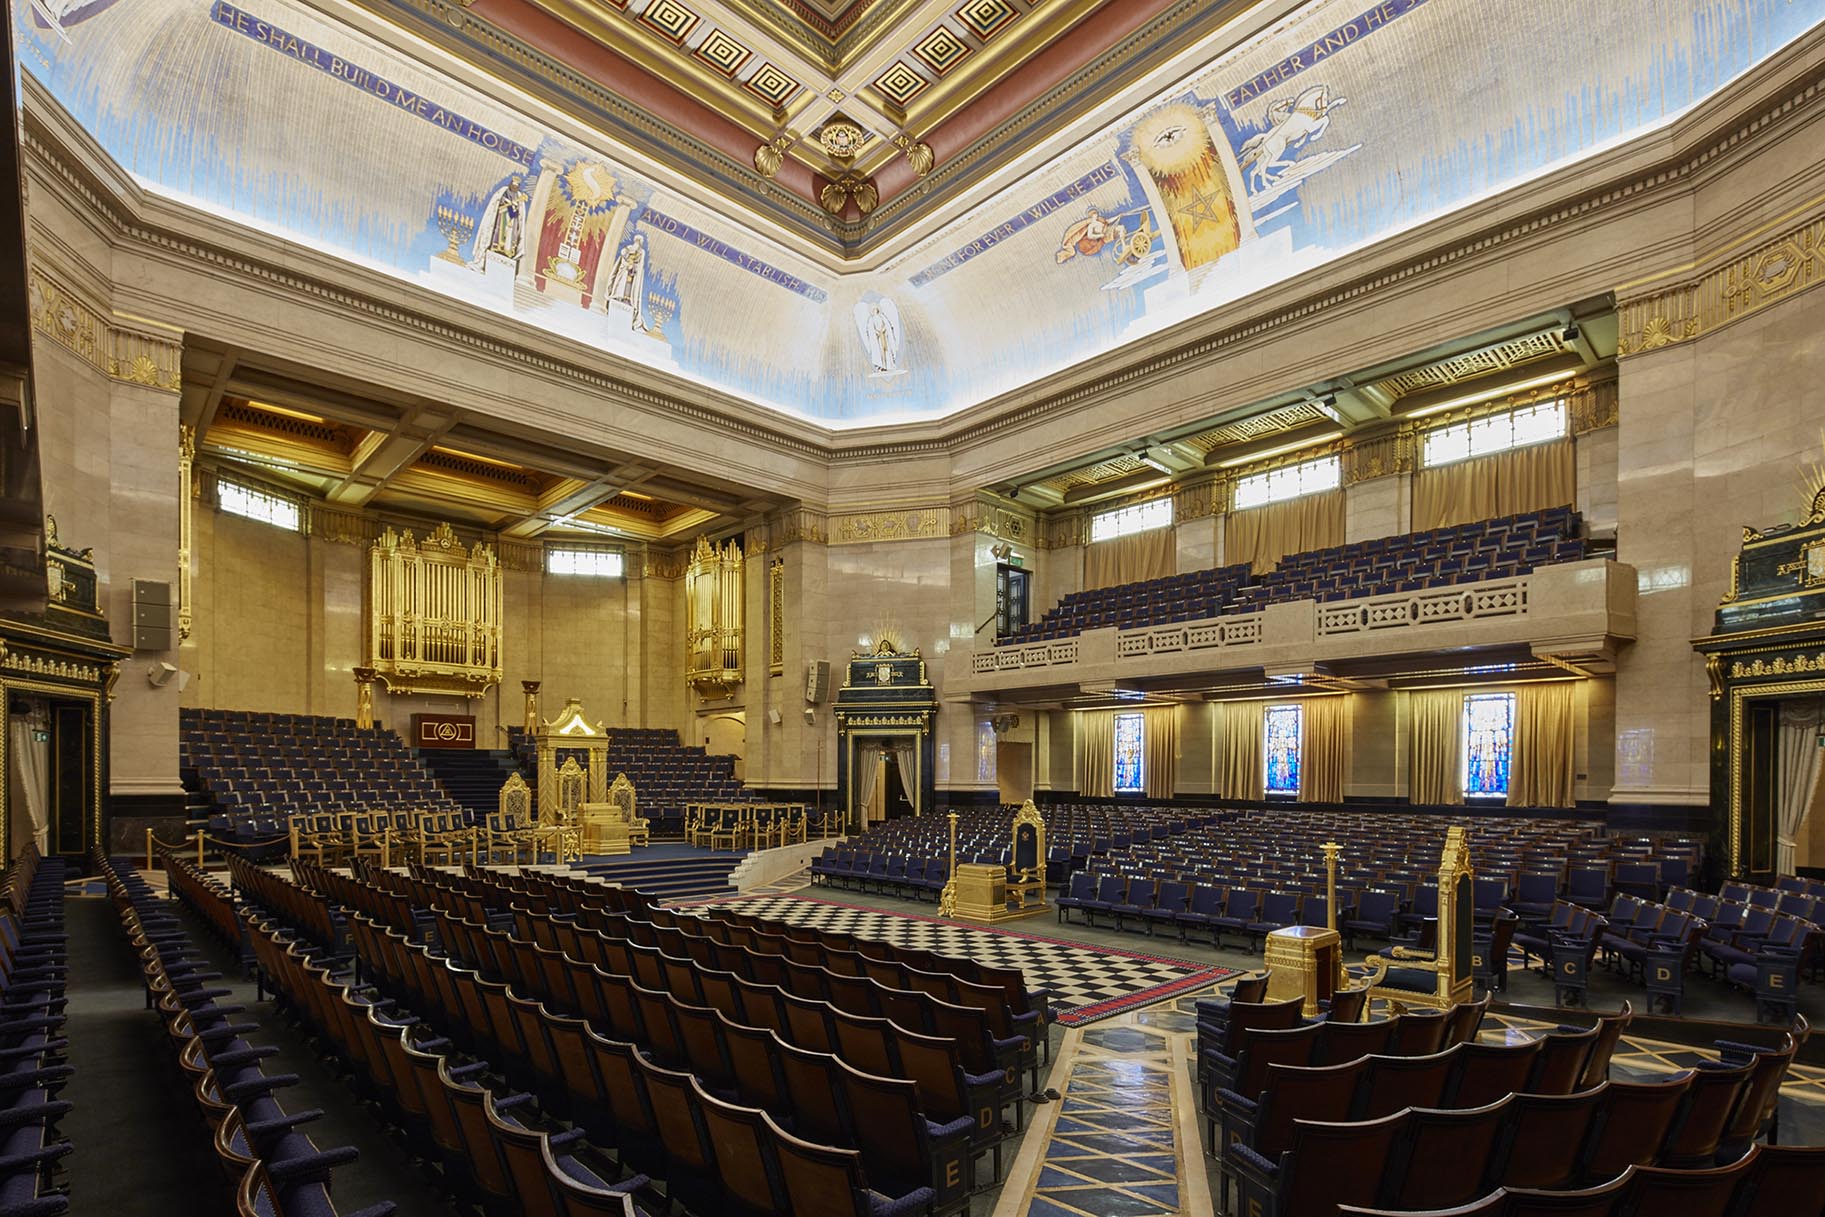 The regal Grand Temple at the Freemason's Hall in London